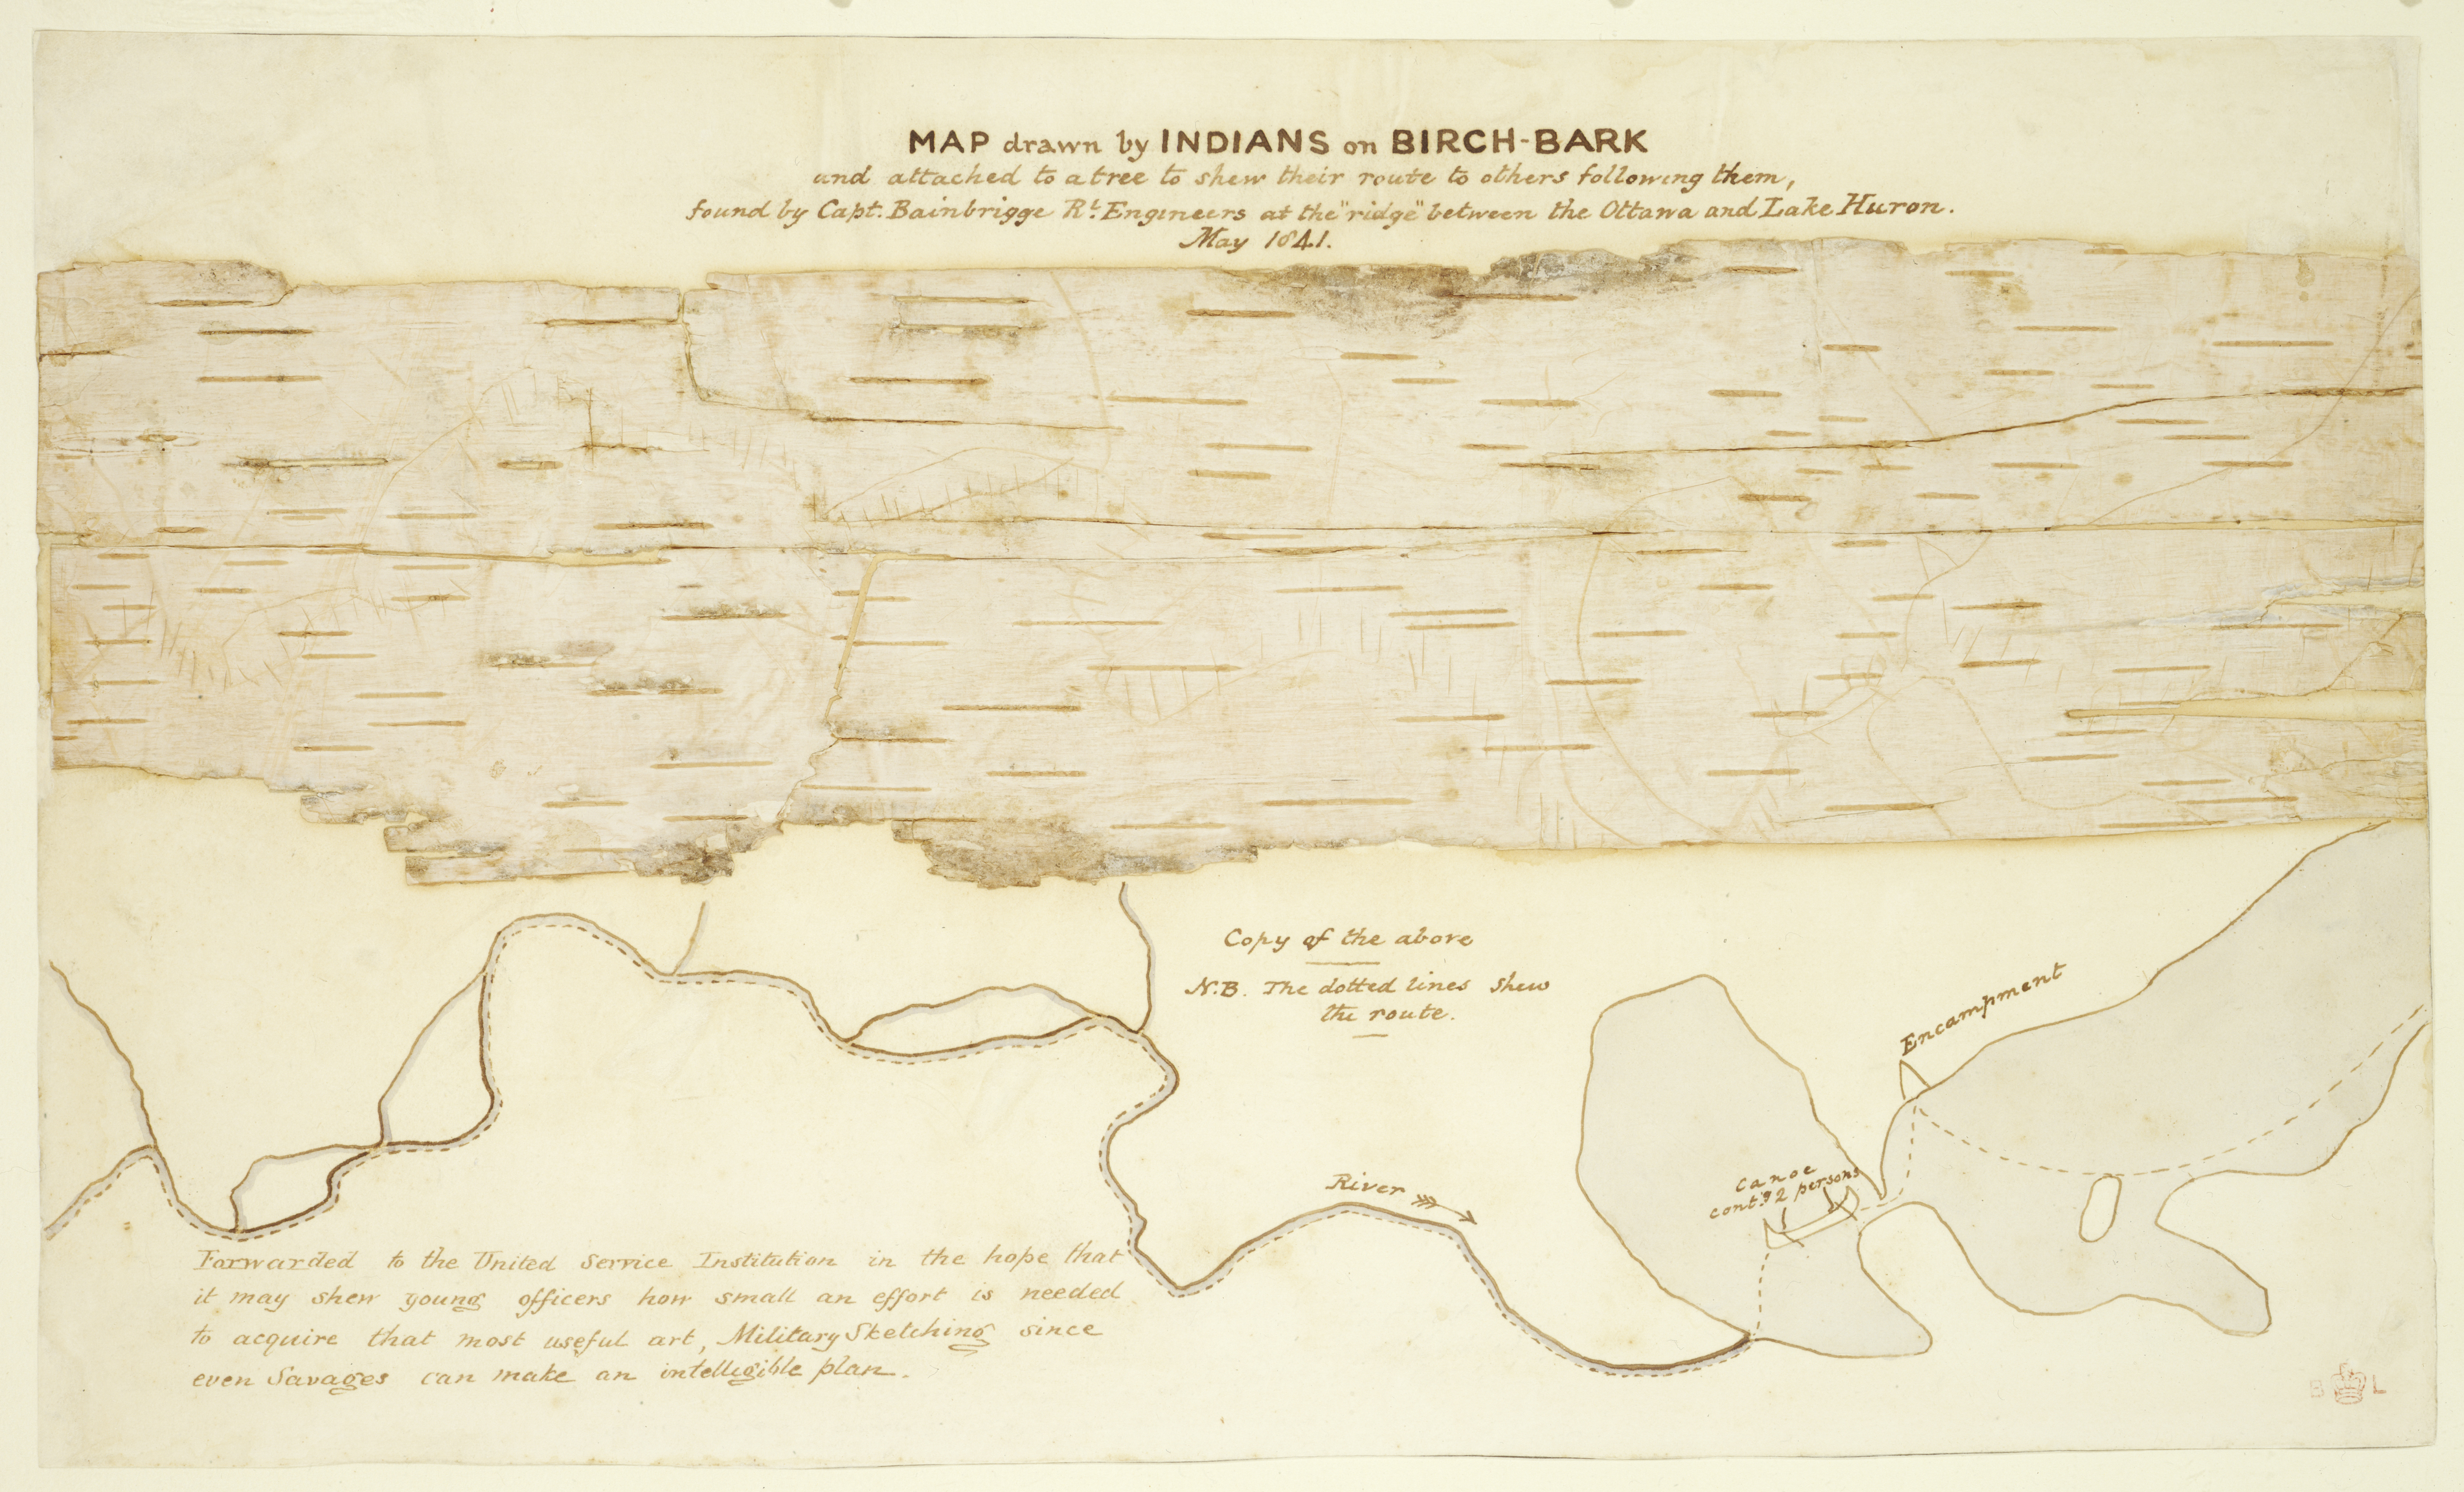 A map drawn as an engraving on tree bark, where horizontal and vertical hatch marks represent various paths through the land near Lake Huron and Ottawa. There are predominately straight horizontal fragmented lines scattered across the bark, and other faint vertical lines and lines which curve around them to depict various trails taken by the indigenous people who made the engravings. The title of the map lies at the top center of the page, and beneath the bark are several annotations and redrawn sketches of the land, river, and nearby camp. A lengthier annotation that lies at the bottom left of the page says the following: “Forwarded to the United Service Institution in the hope that it may shew young officers how small an effort is needed to acquire that most useful art, Military Sketching since even Savages can make an intelligible plan.”